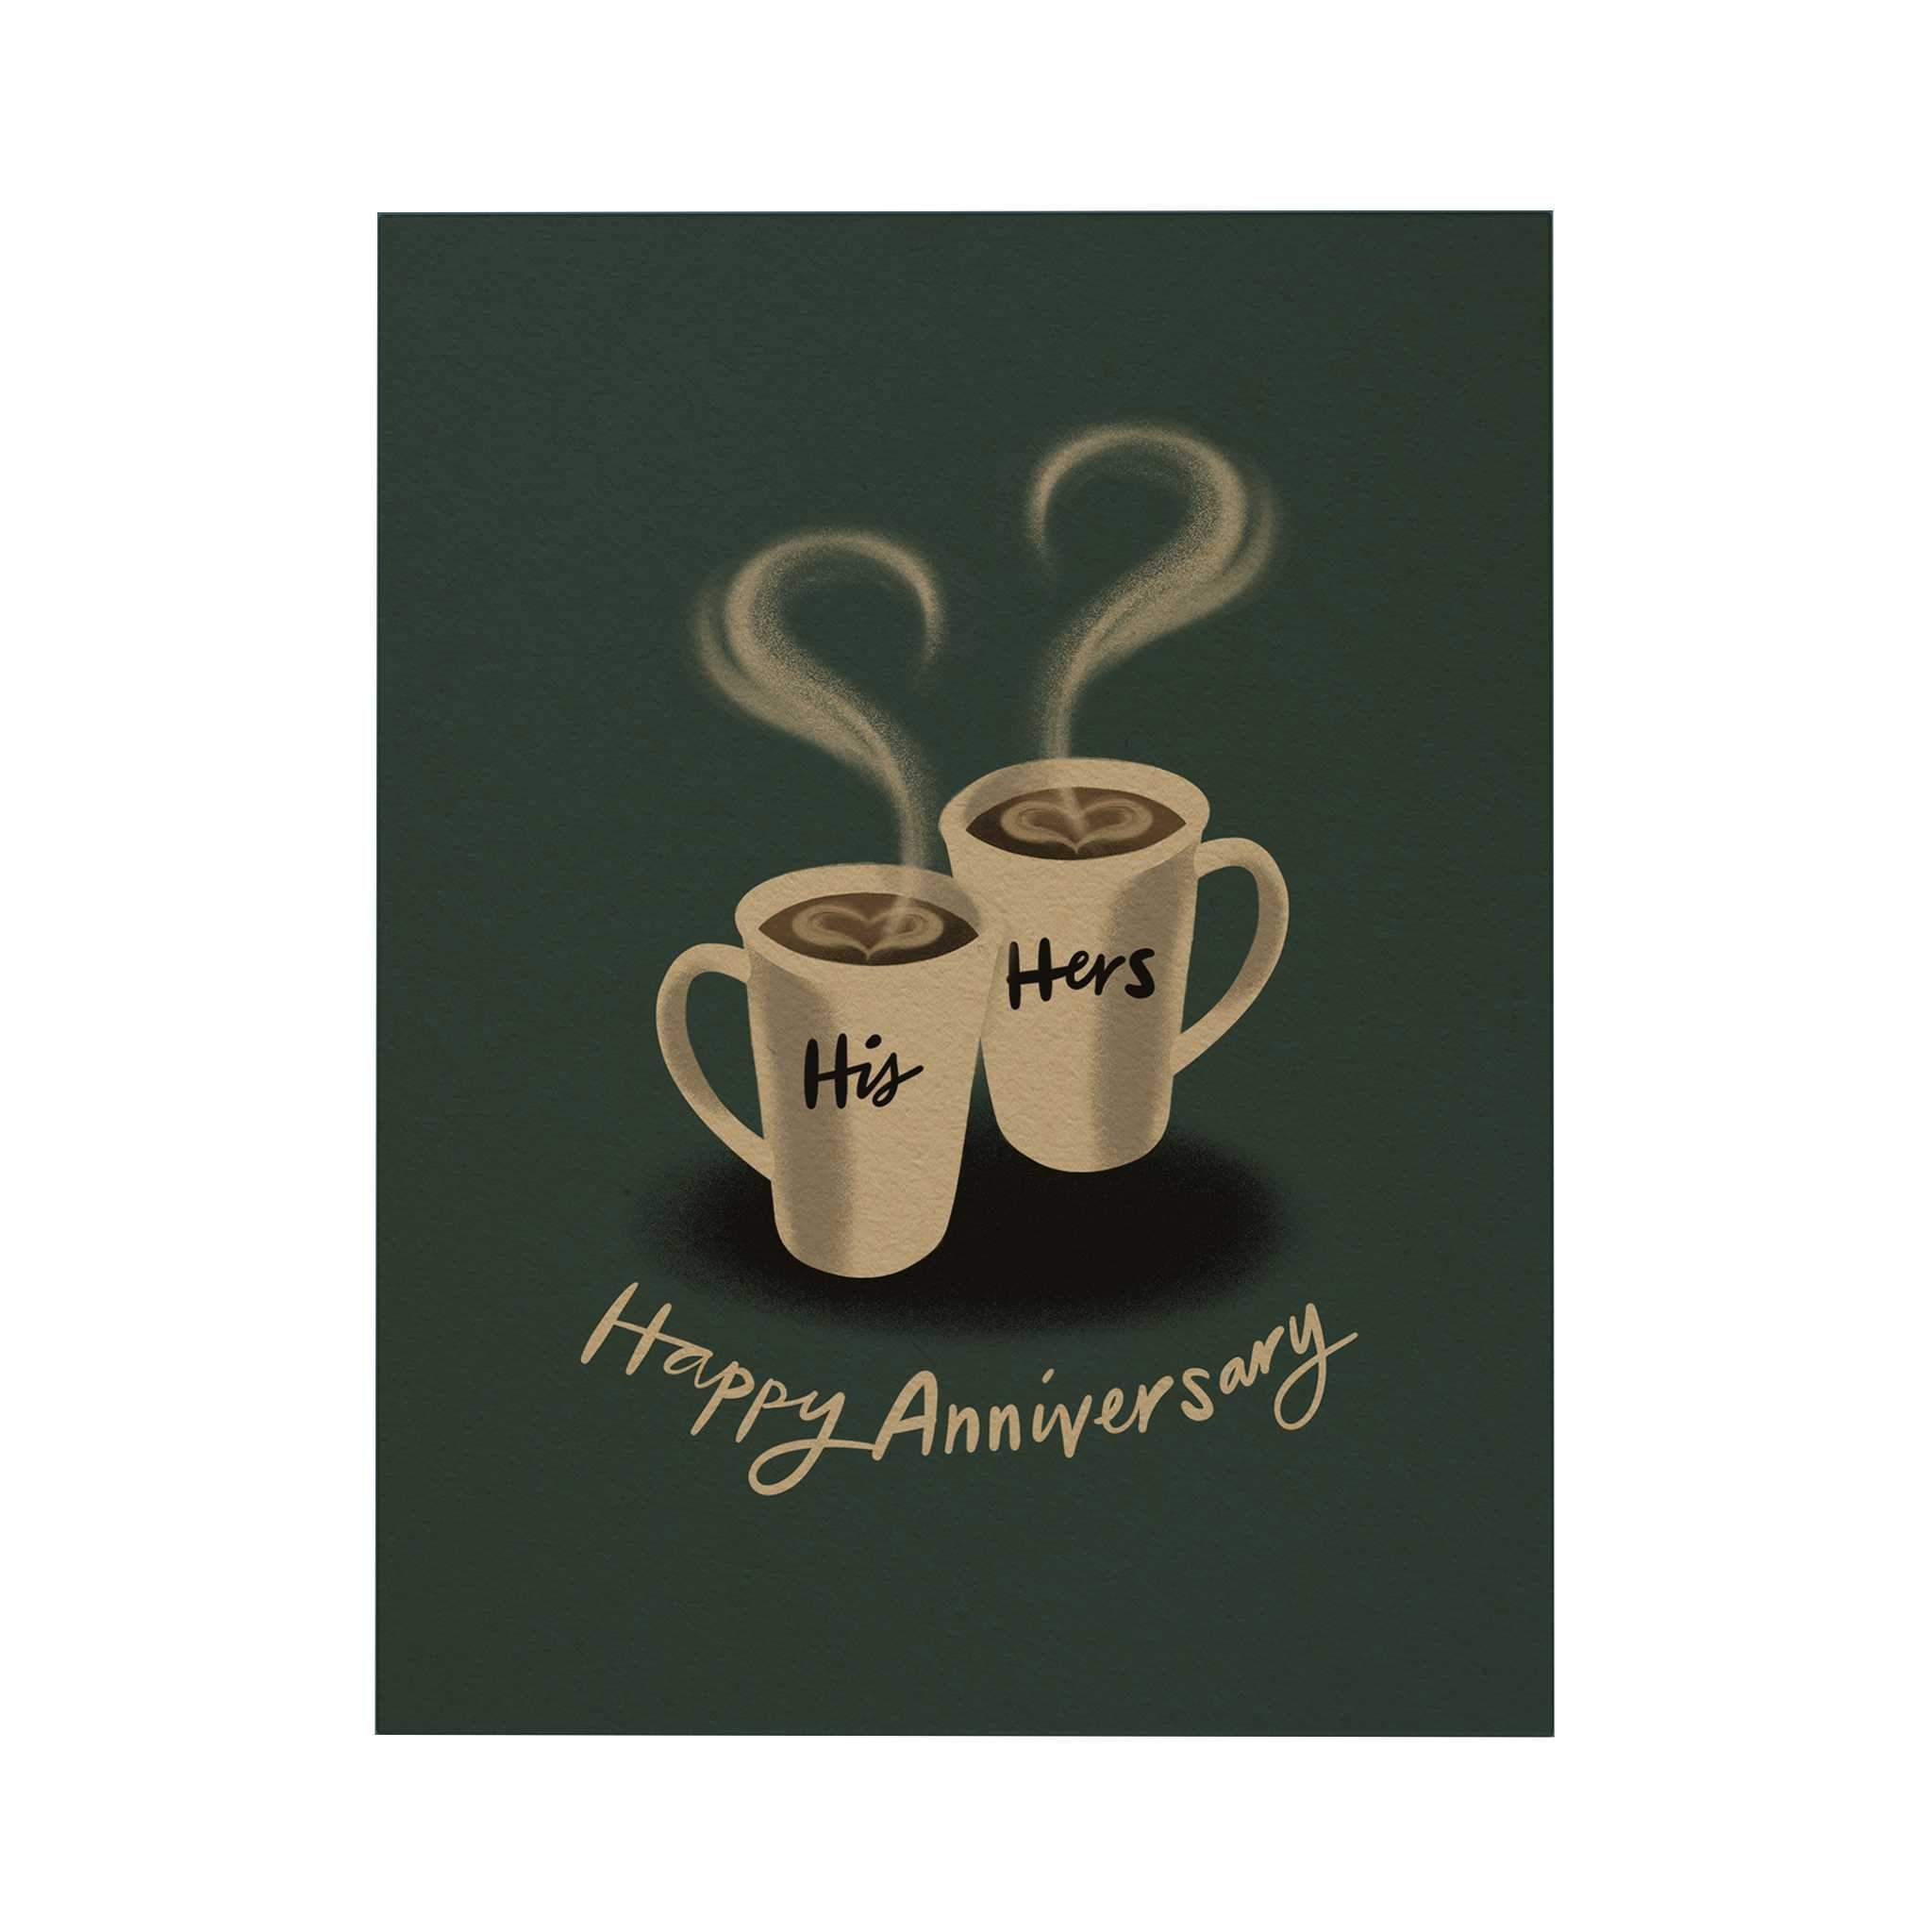 Happy Anniversary Greeting Card: His and Hers